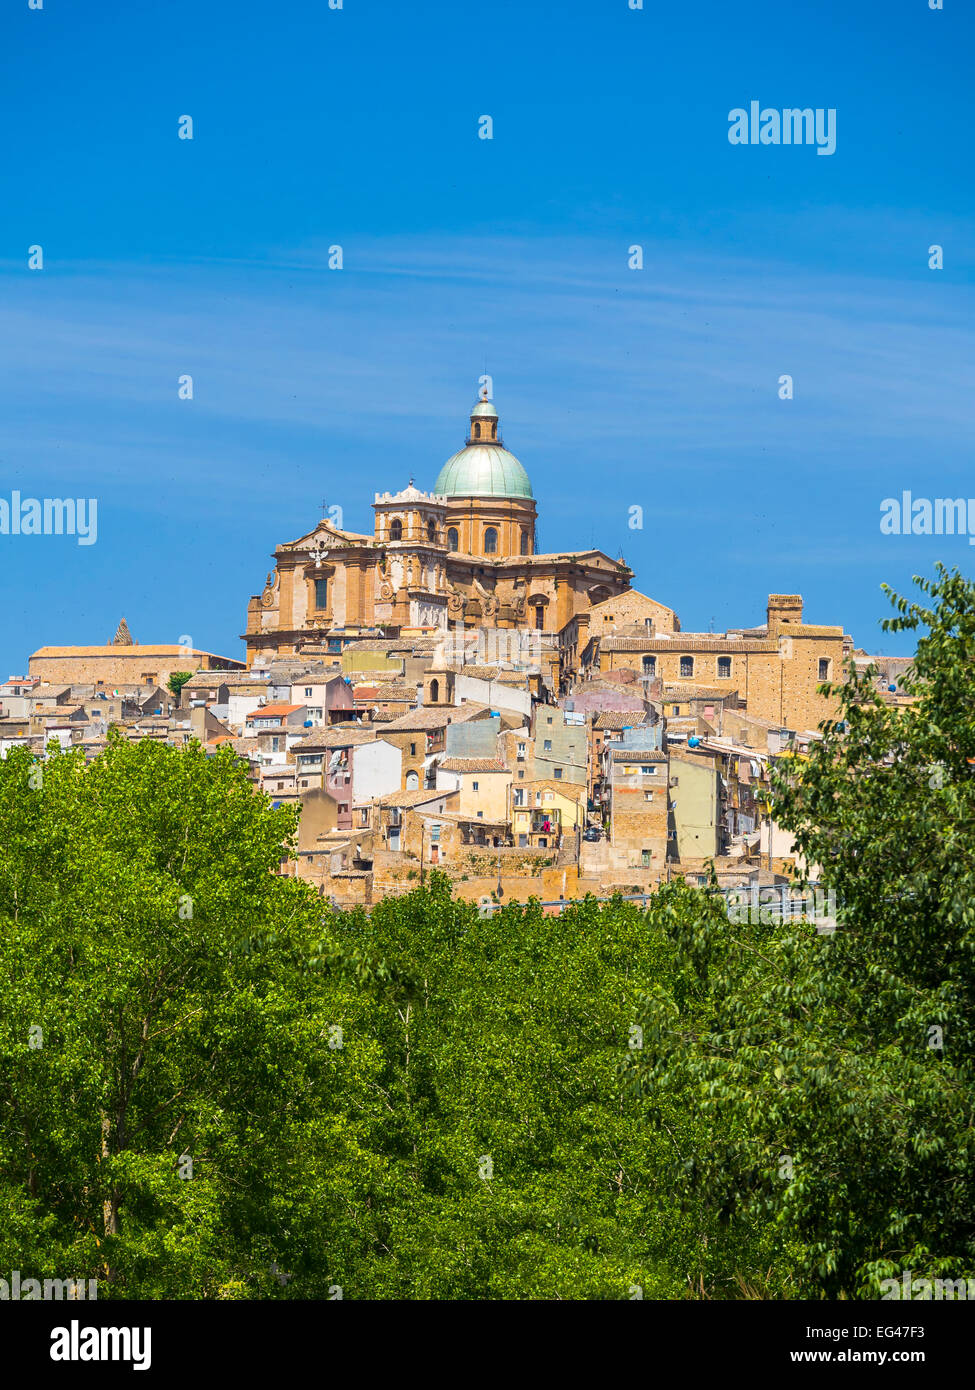 Town view with Piazza Armerina Cathedral, Piazza Armerina, Province of Enna, Sicily, Italy Stock Photo